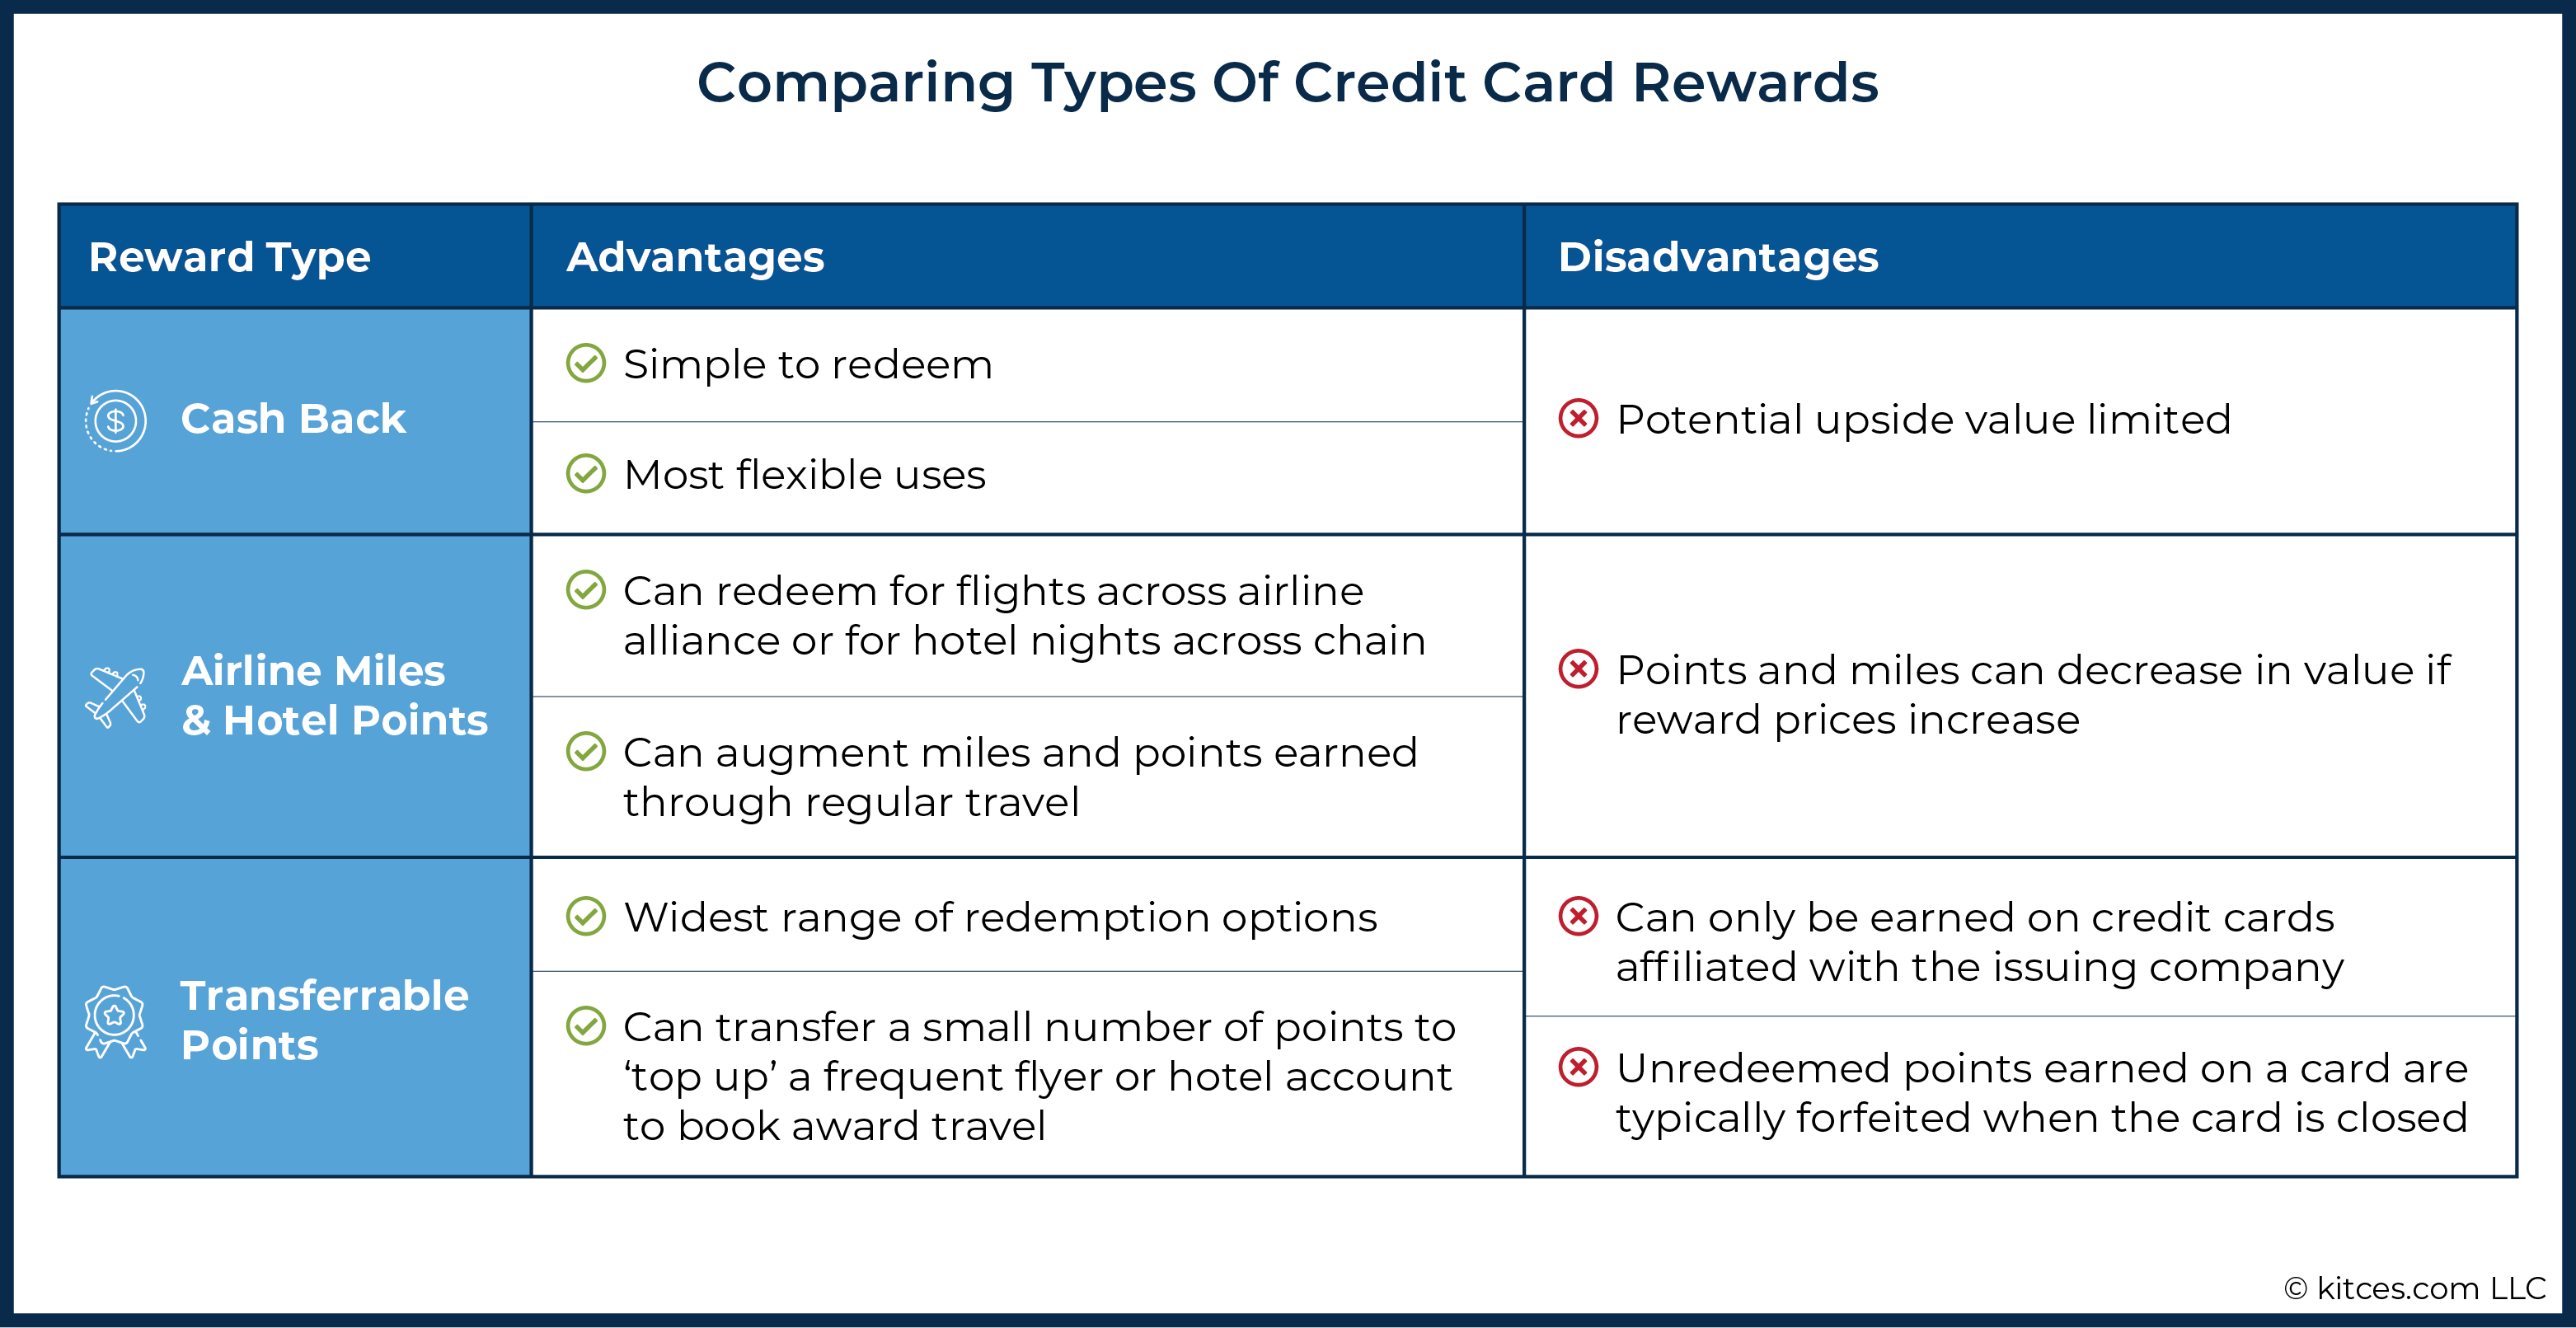 Difference between indicated and received payment - Rewards